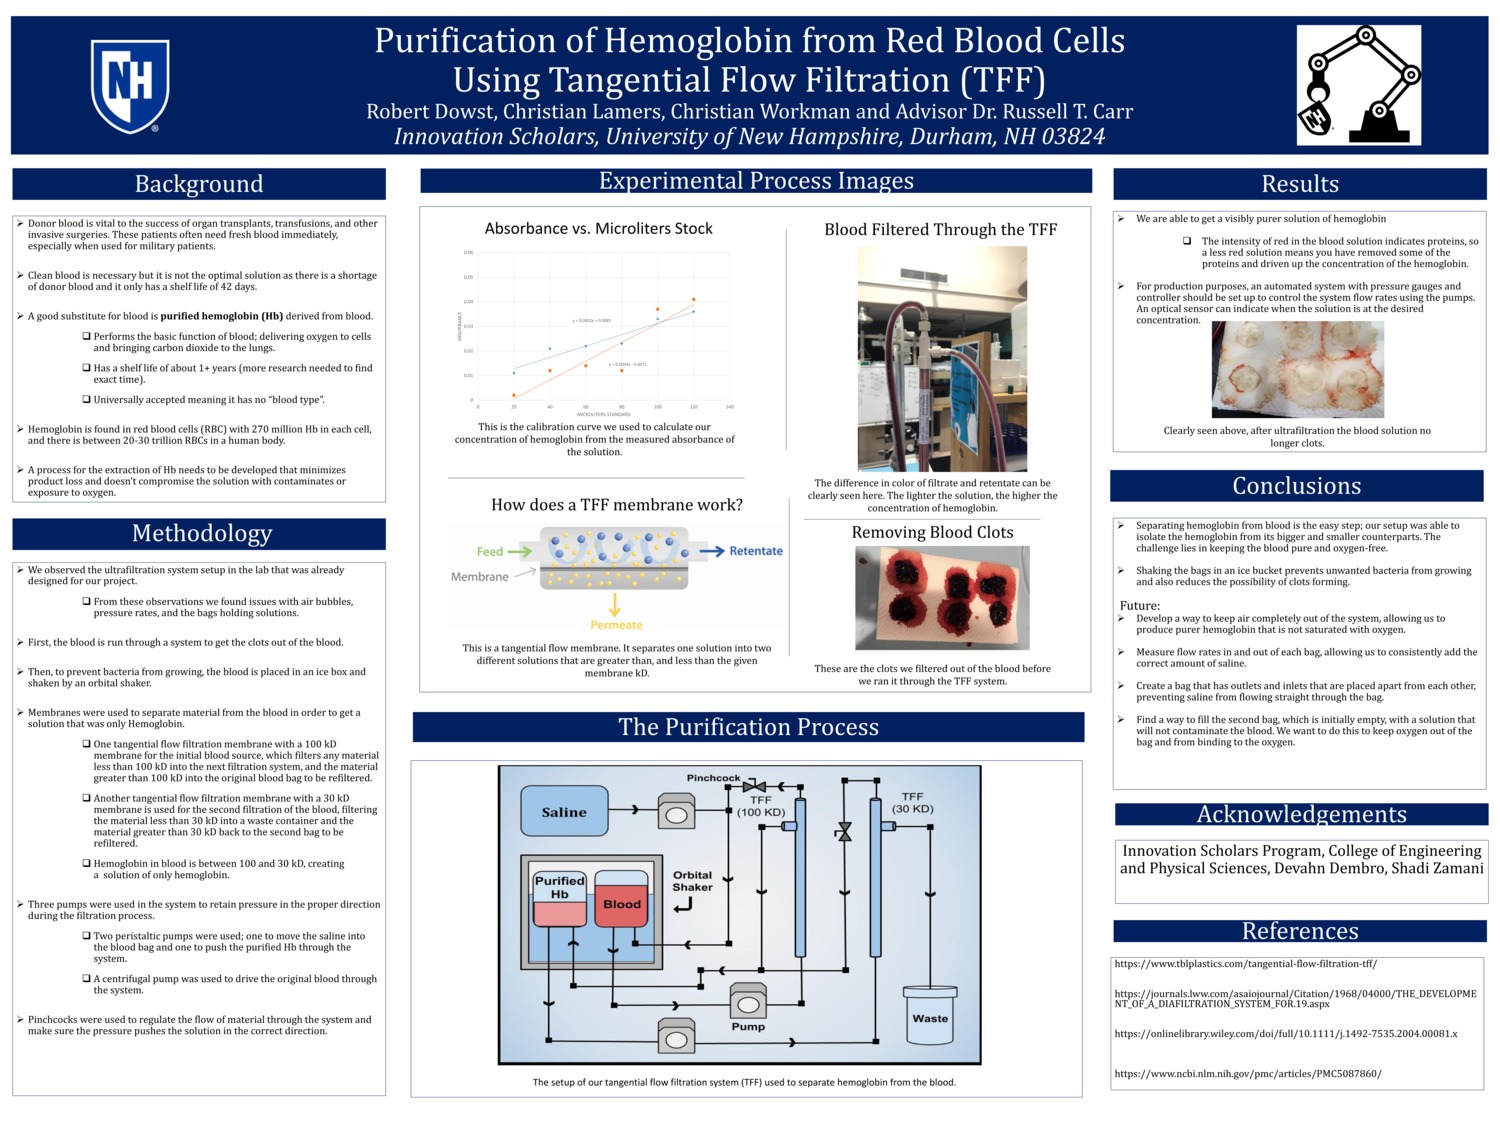 Purification Of Hemoglobin From Red Blood Cells Using Tangential Flow Filtration (Tff) by cnw1009